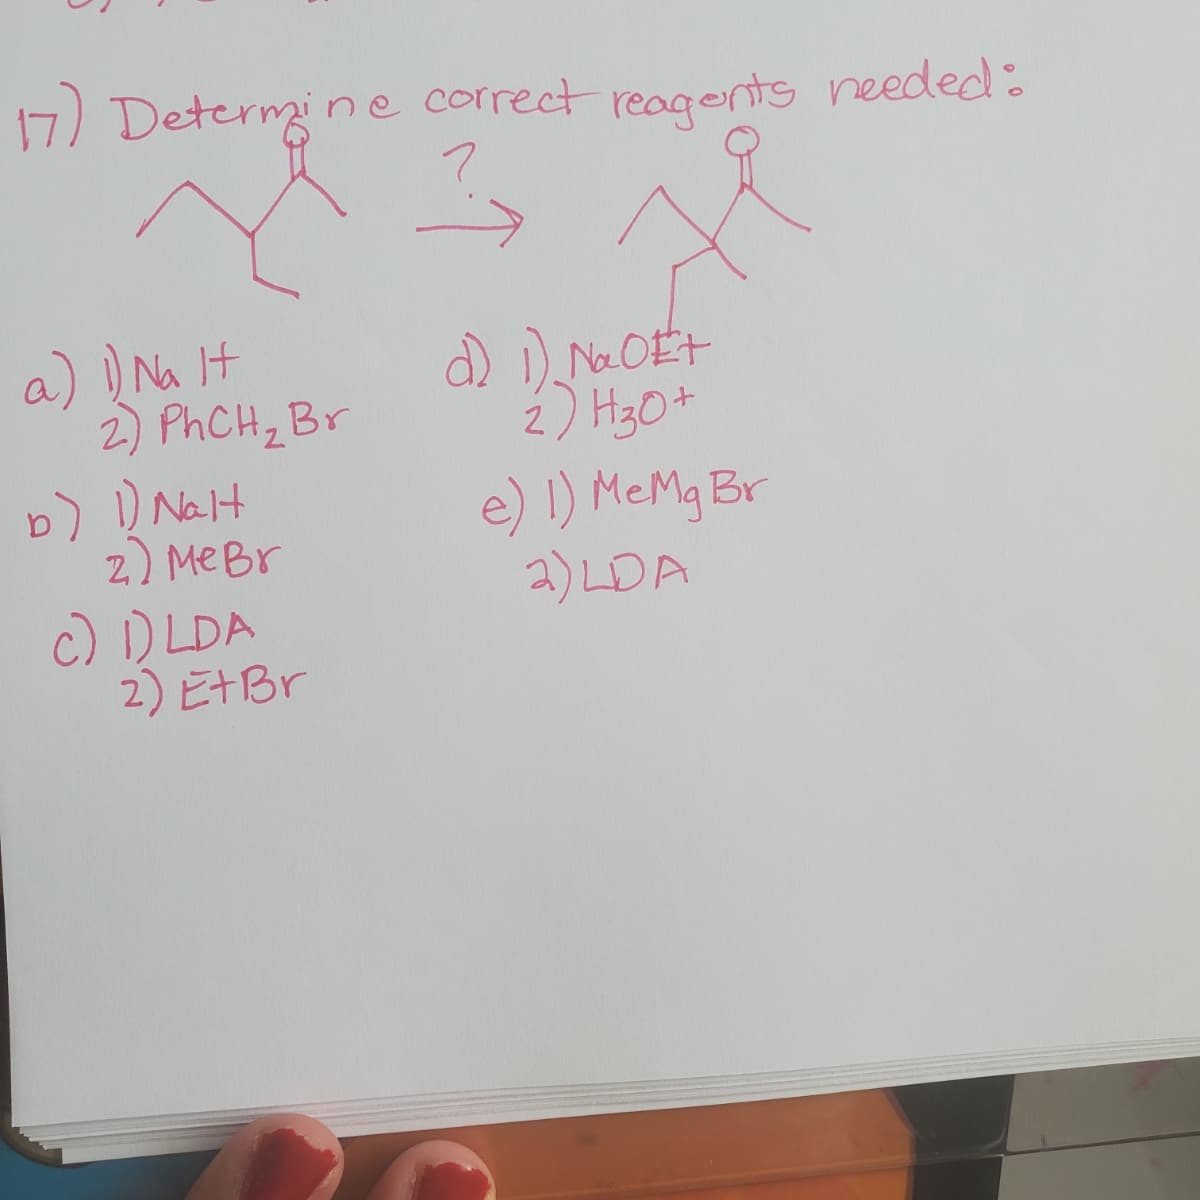 17) Determine correct reagents needed:
a) ) Na It
2) PHCH, Br
b) D Nalt
z) MeBr
c) DLDA
2) E+Br
) Na OET
2) H3O+
e) ) MeMg Br
2) LDA
